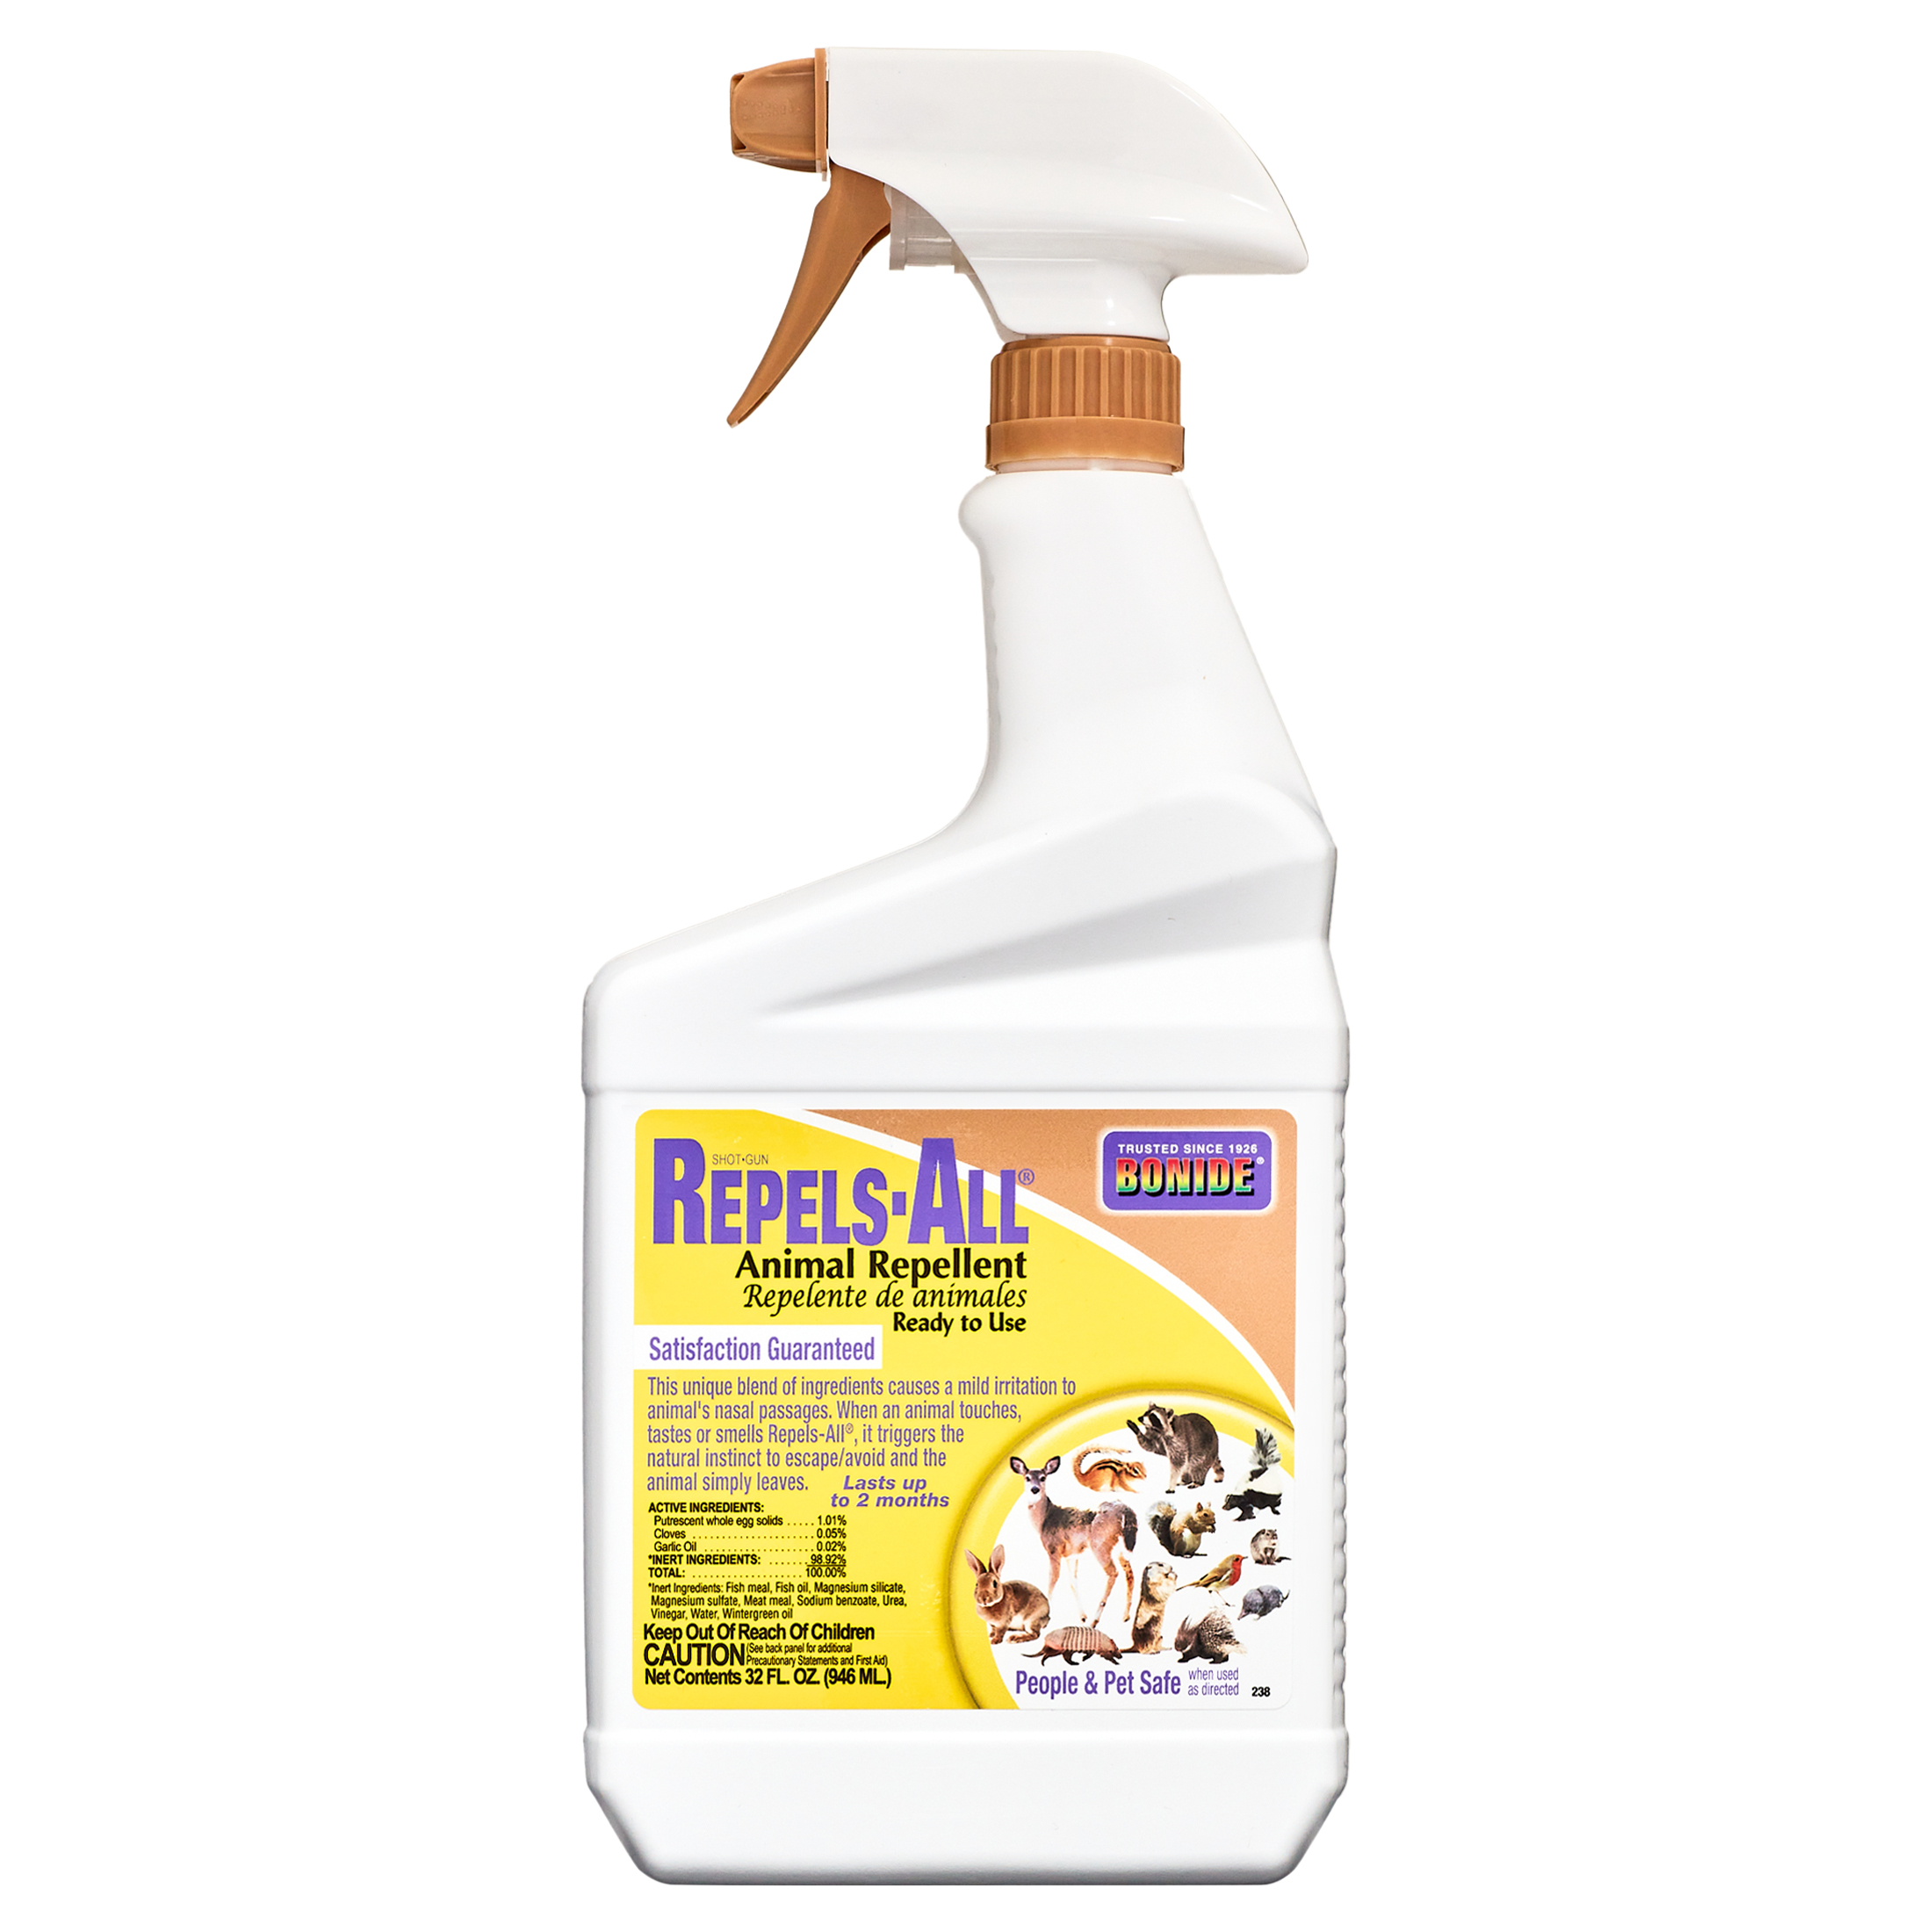 Bonide Repels All 32 oz Animal Repellent Ready-to-Use Spray for Outdoor Use - image 1 of 12